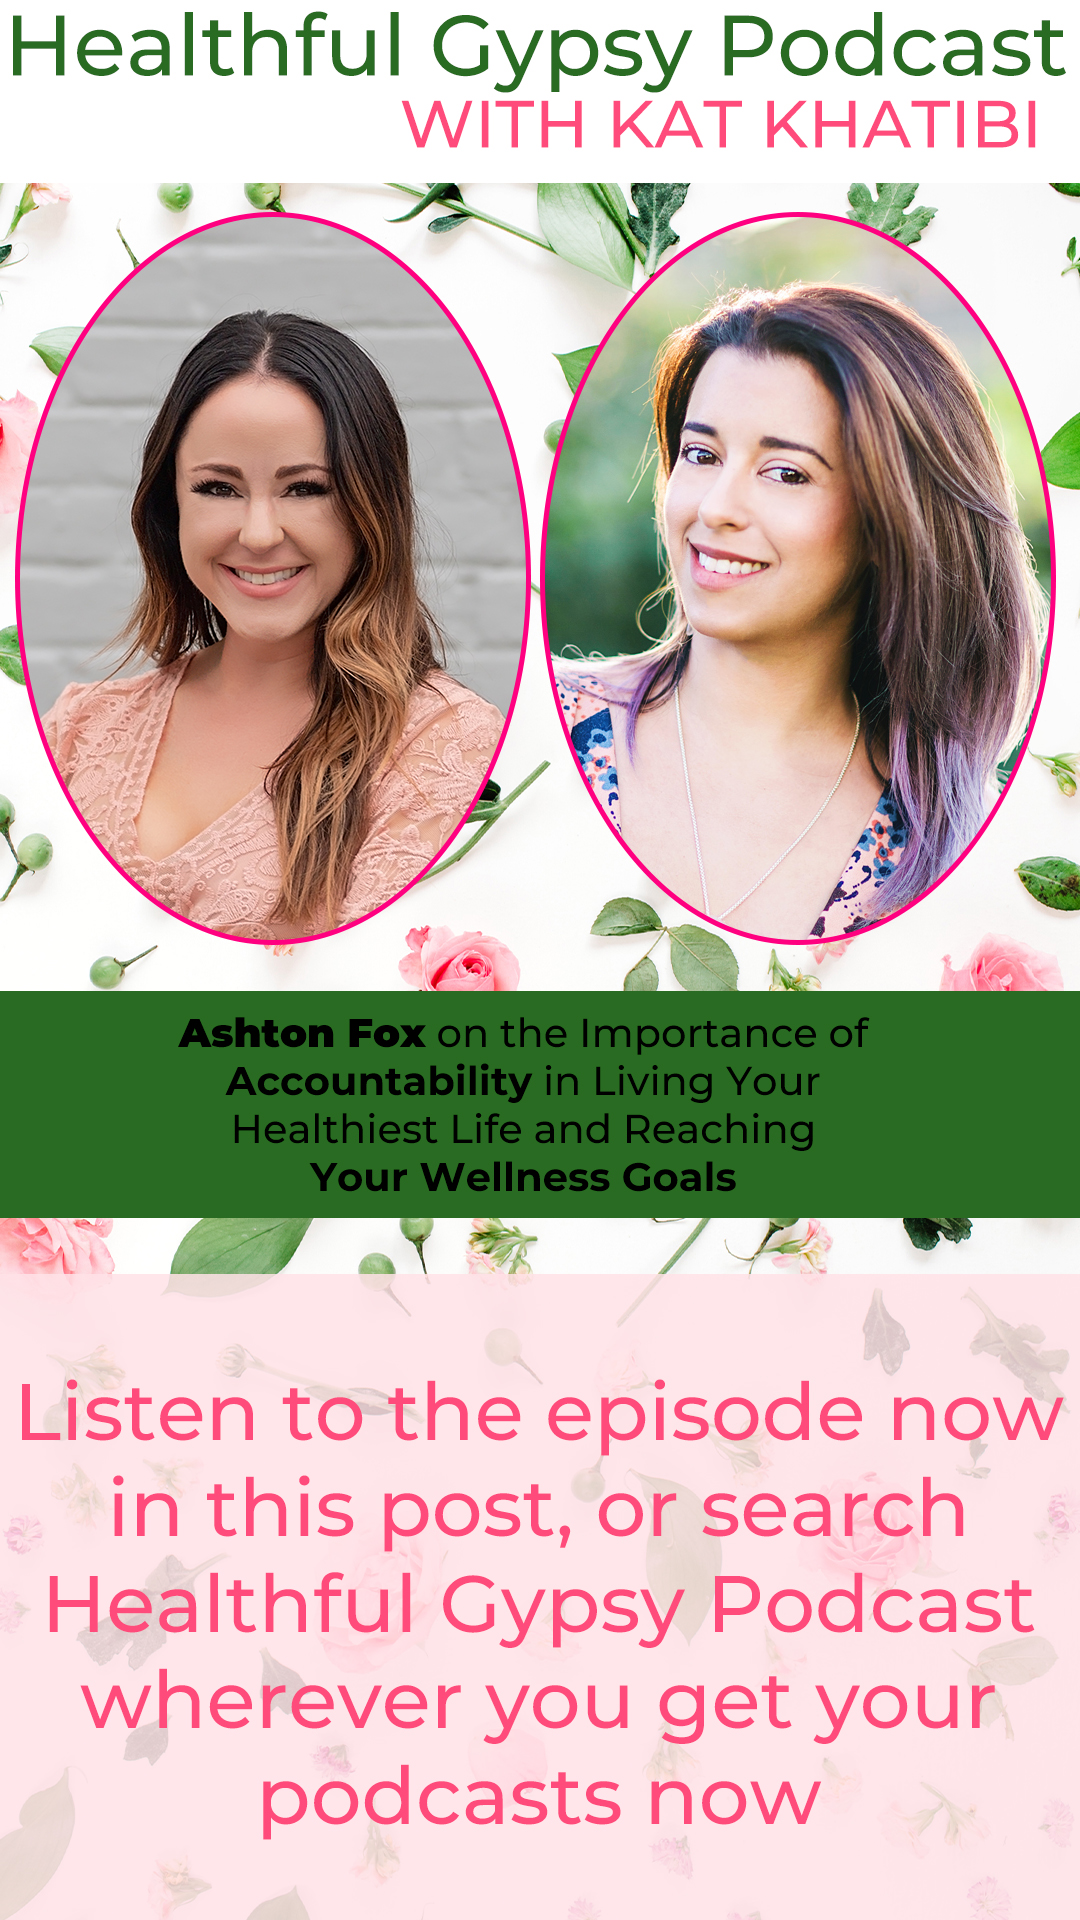 Ashton Fox on the Importance of Accountability in Living Your Healthiest Life and Reaching Your Wellness Goals